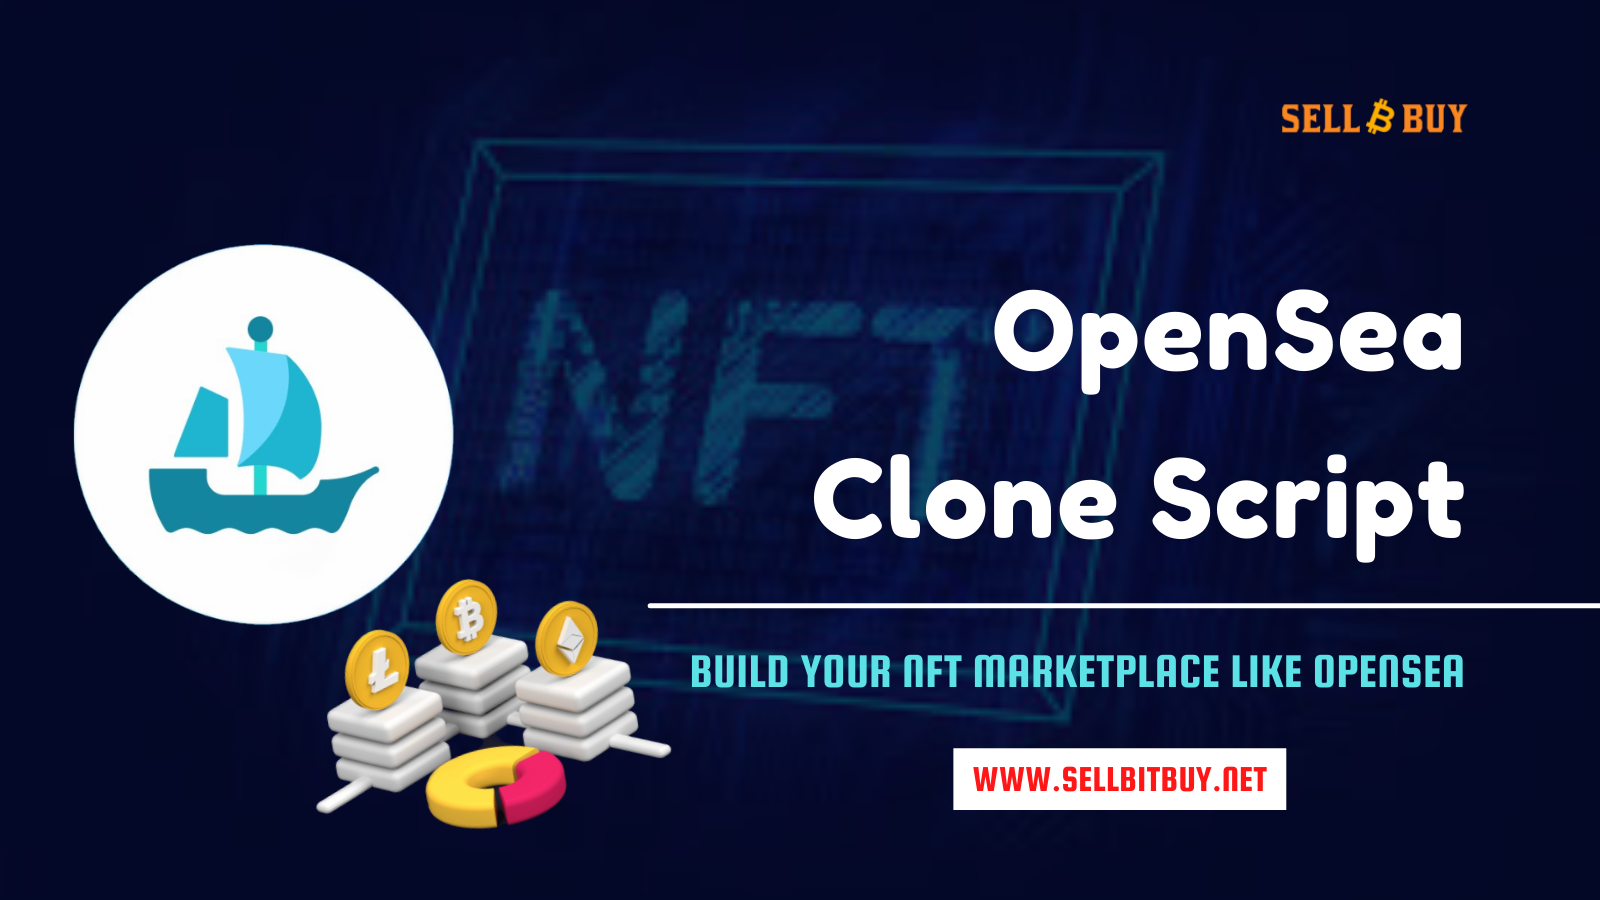 Article about NFT Sales Hits $2.15B - Entrepreneurs Great Opportunity To Launch OpenSea Like NFT Marketplace